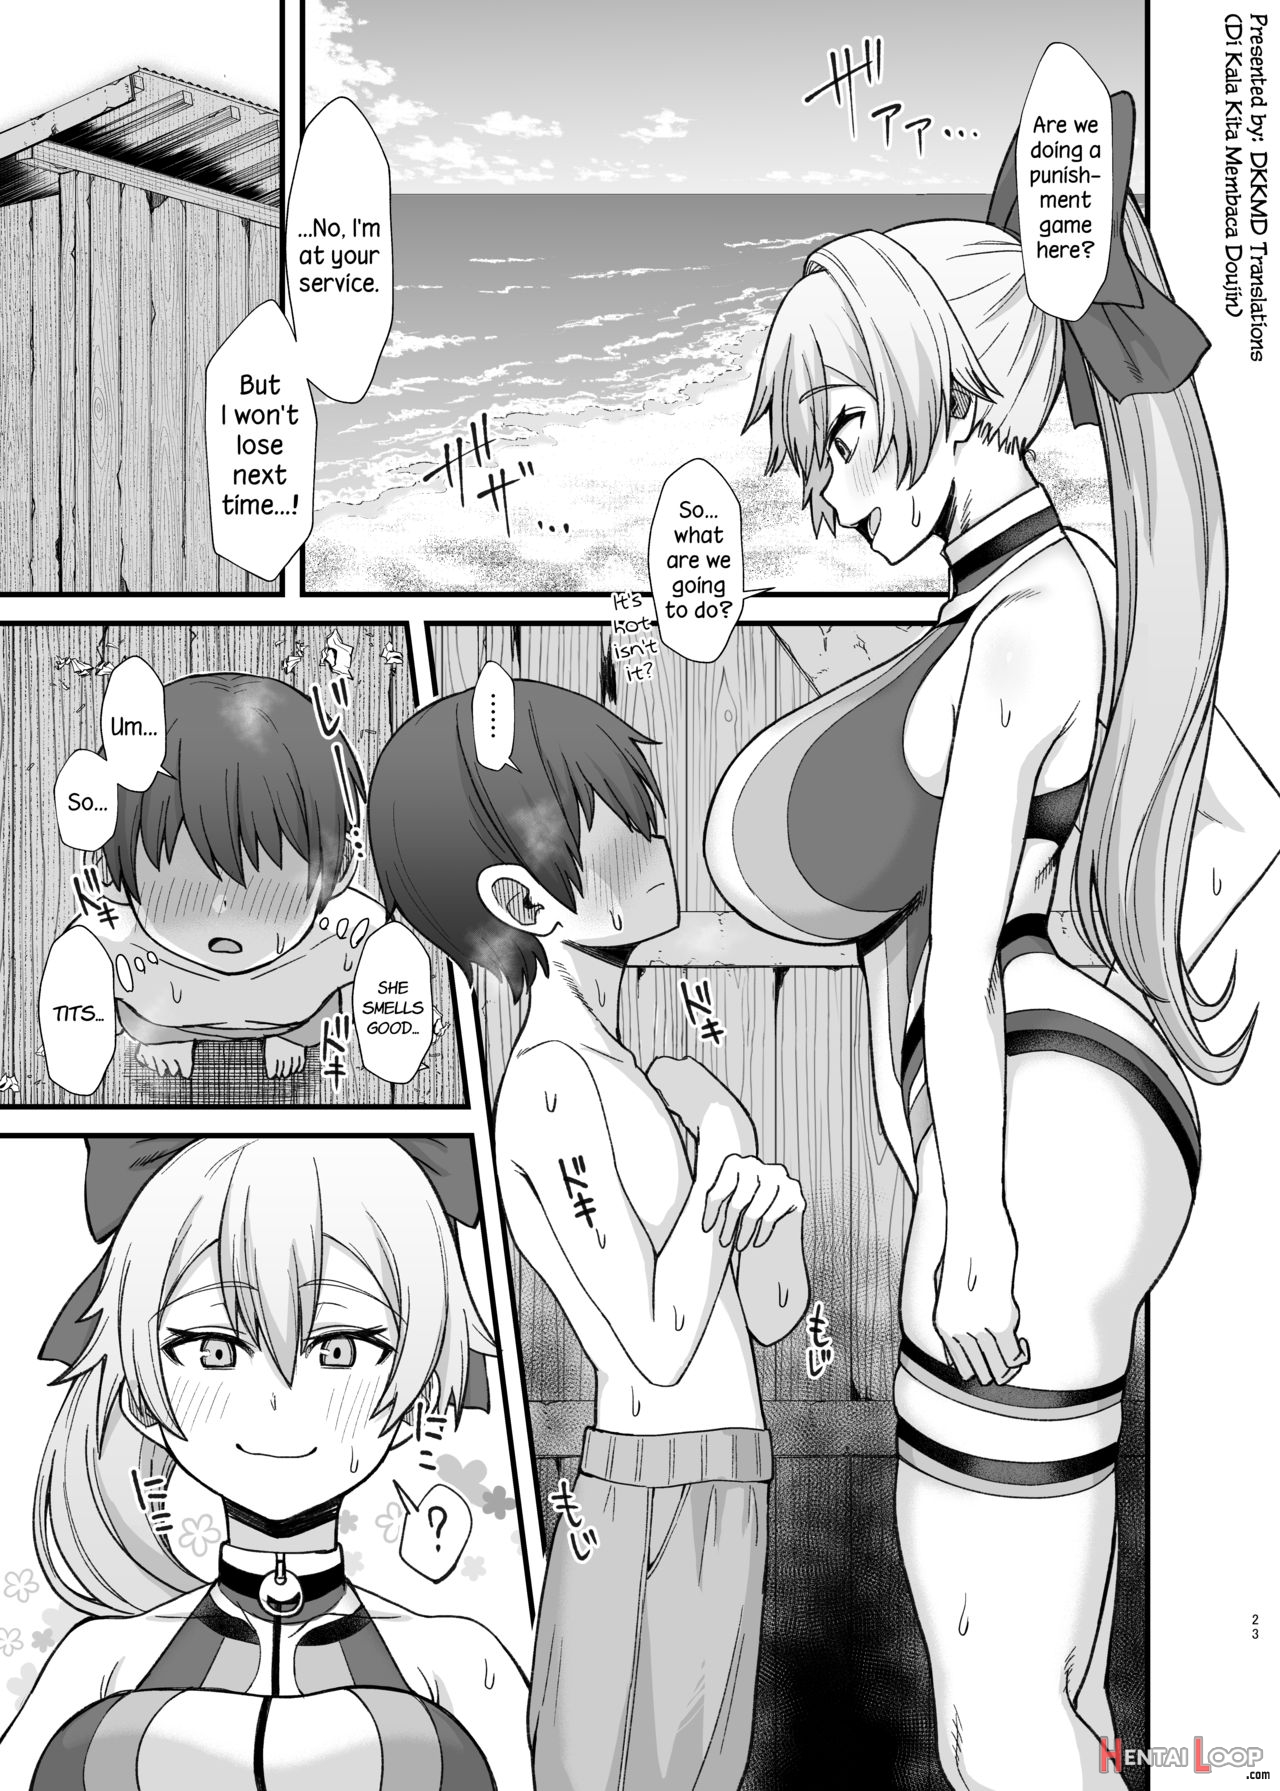 A Story Of Tomoe Gozen Being Punished By A Shota page 1